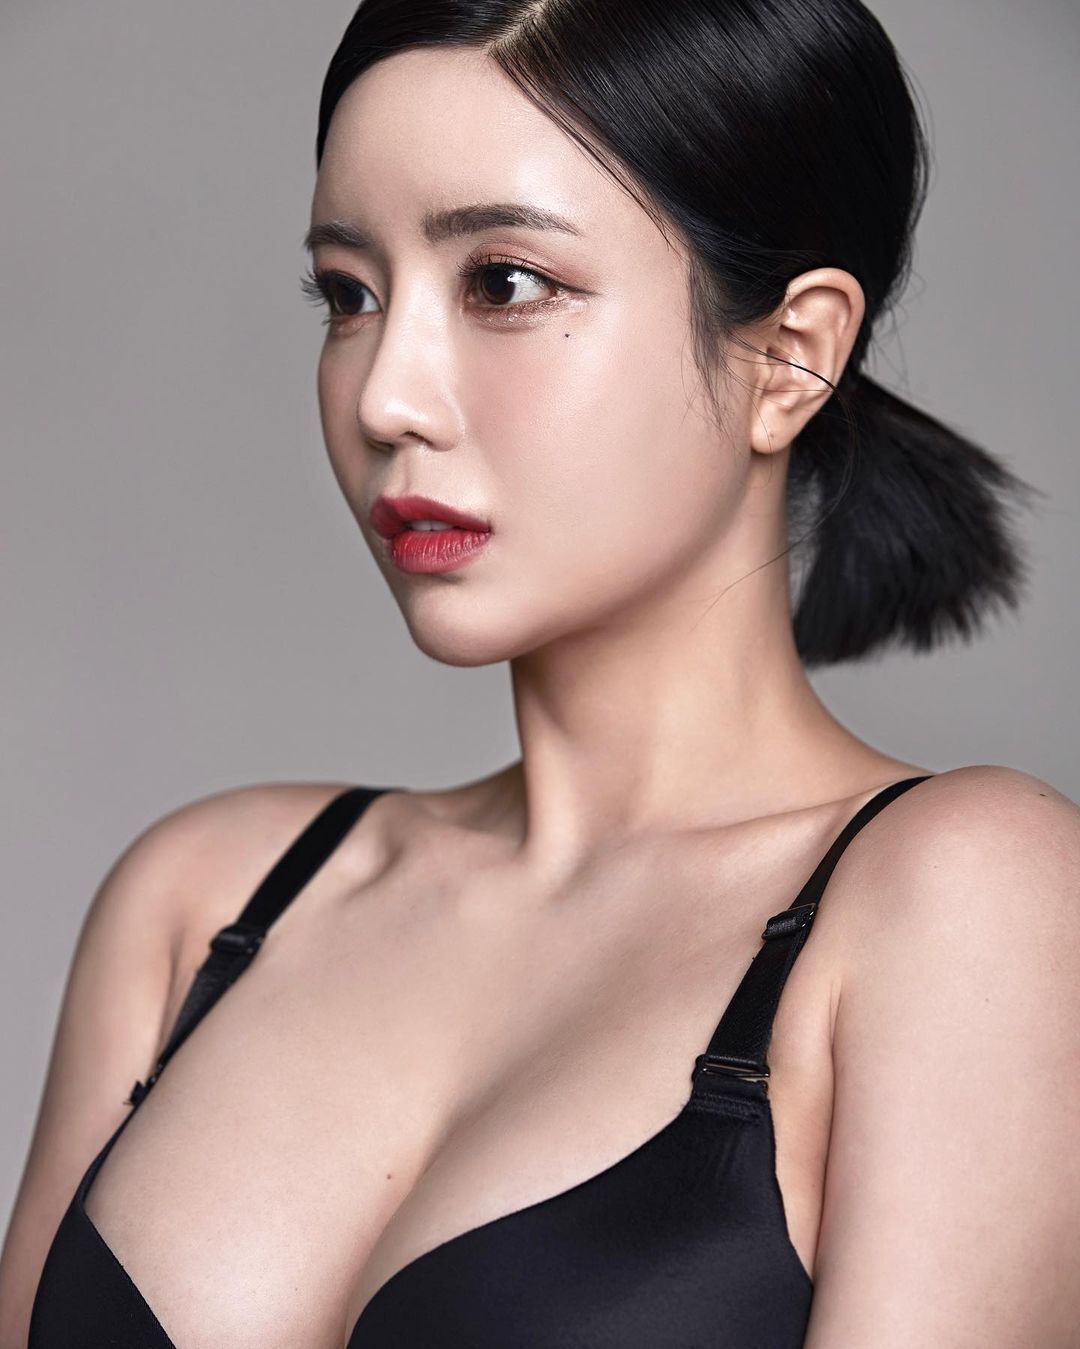 African BJ Seoyoon photo shoot black lace bra cleavage in formal suit